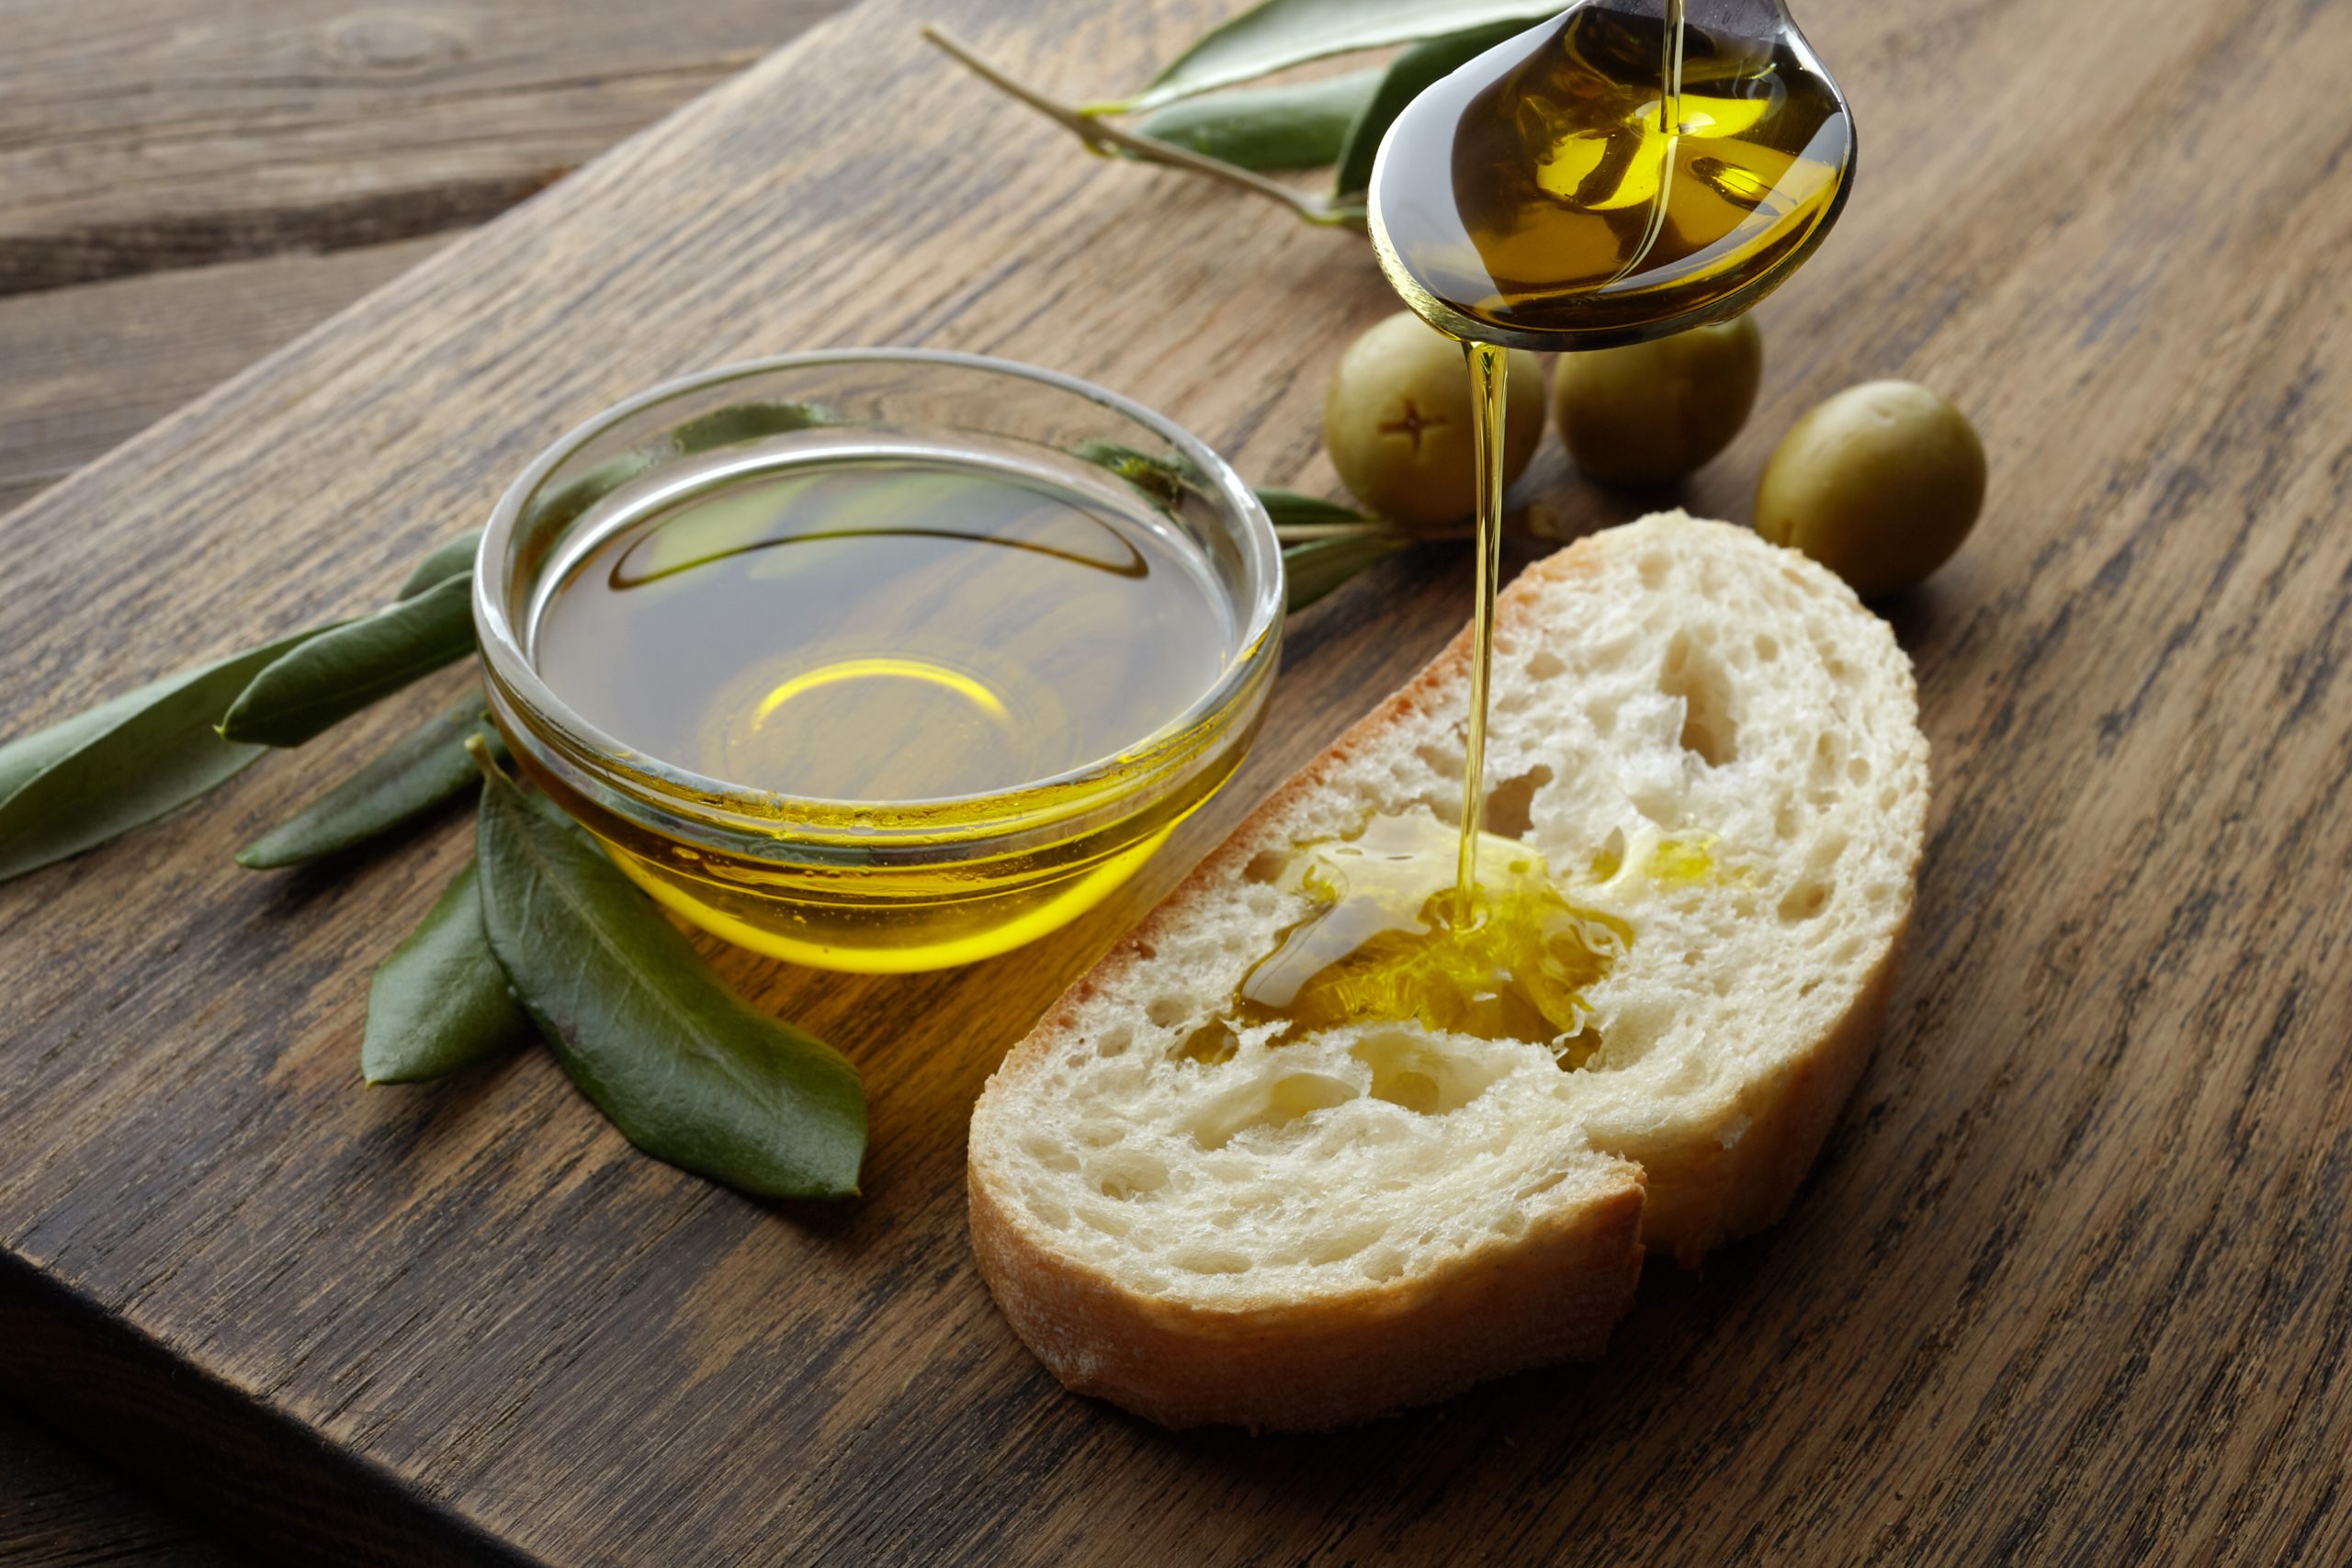 Slice of bread with drizzle of olive oil